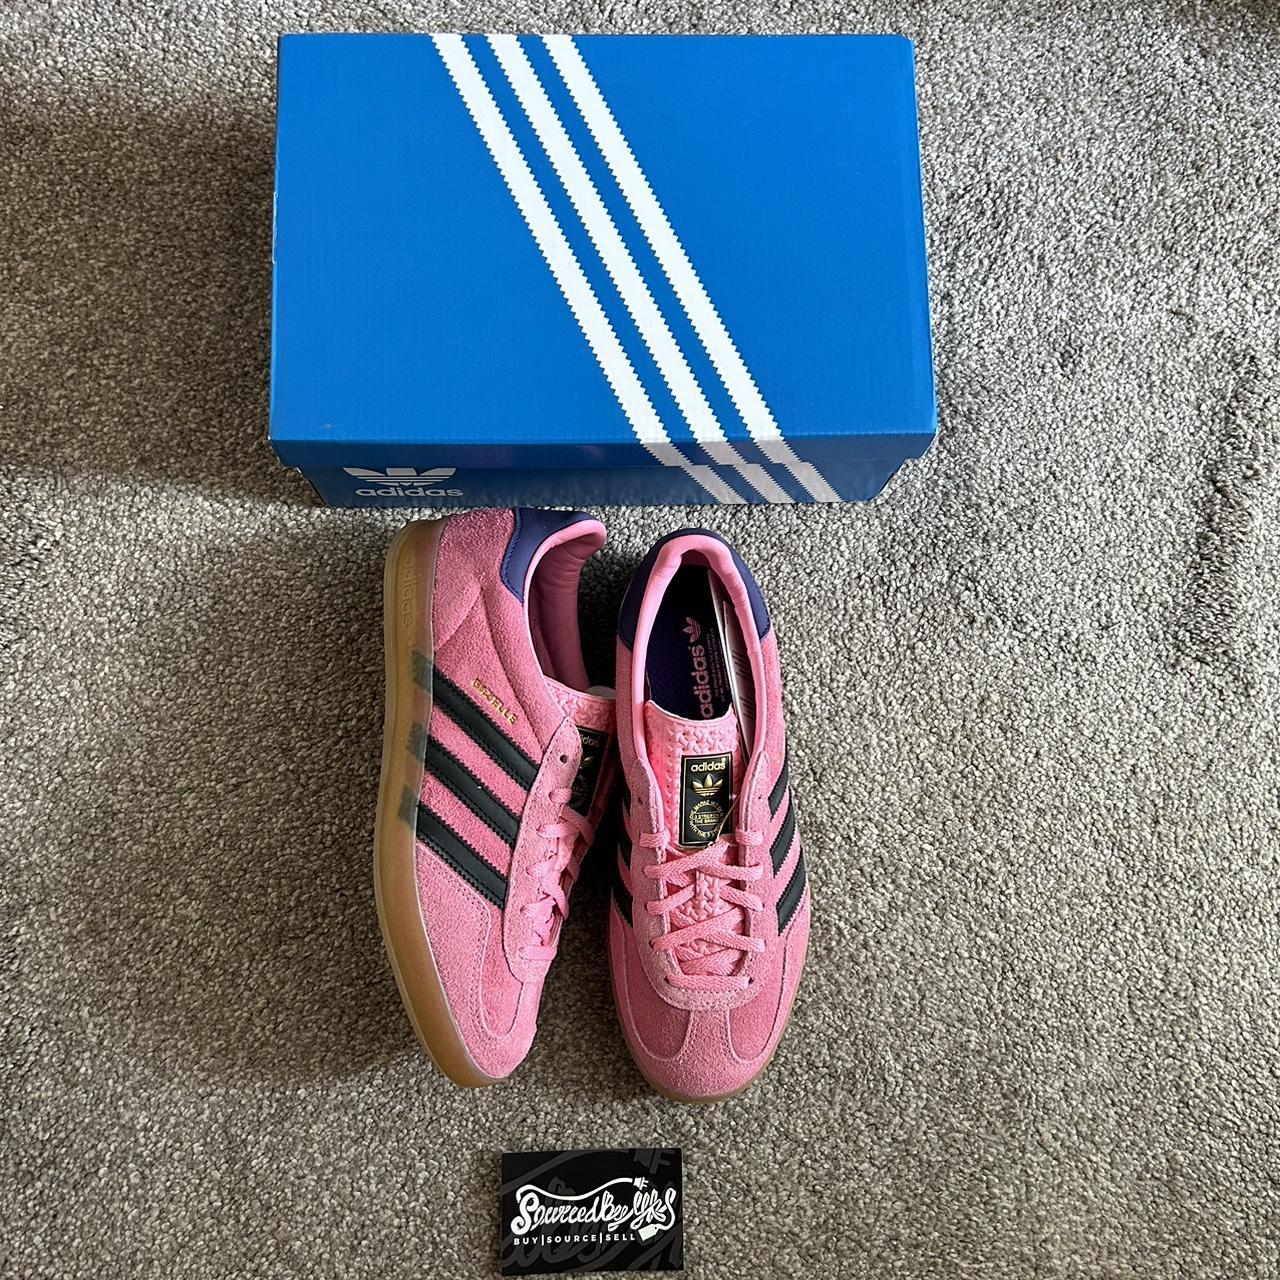 Adidas Gazelle Indoors “Bliss Pink” 🌸 Other sizes... - Depop